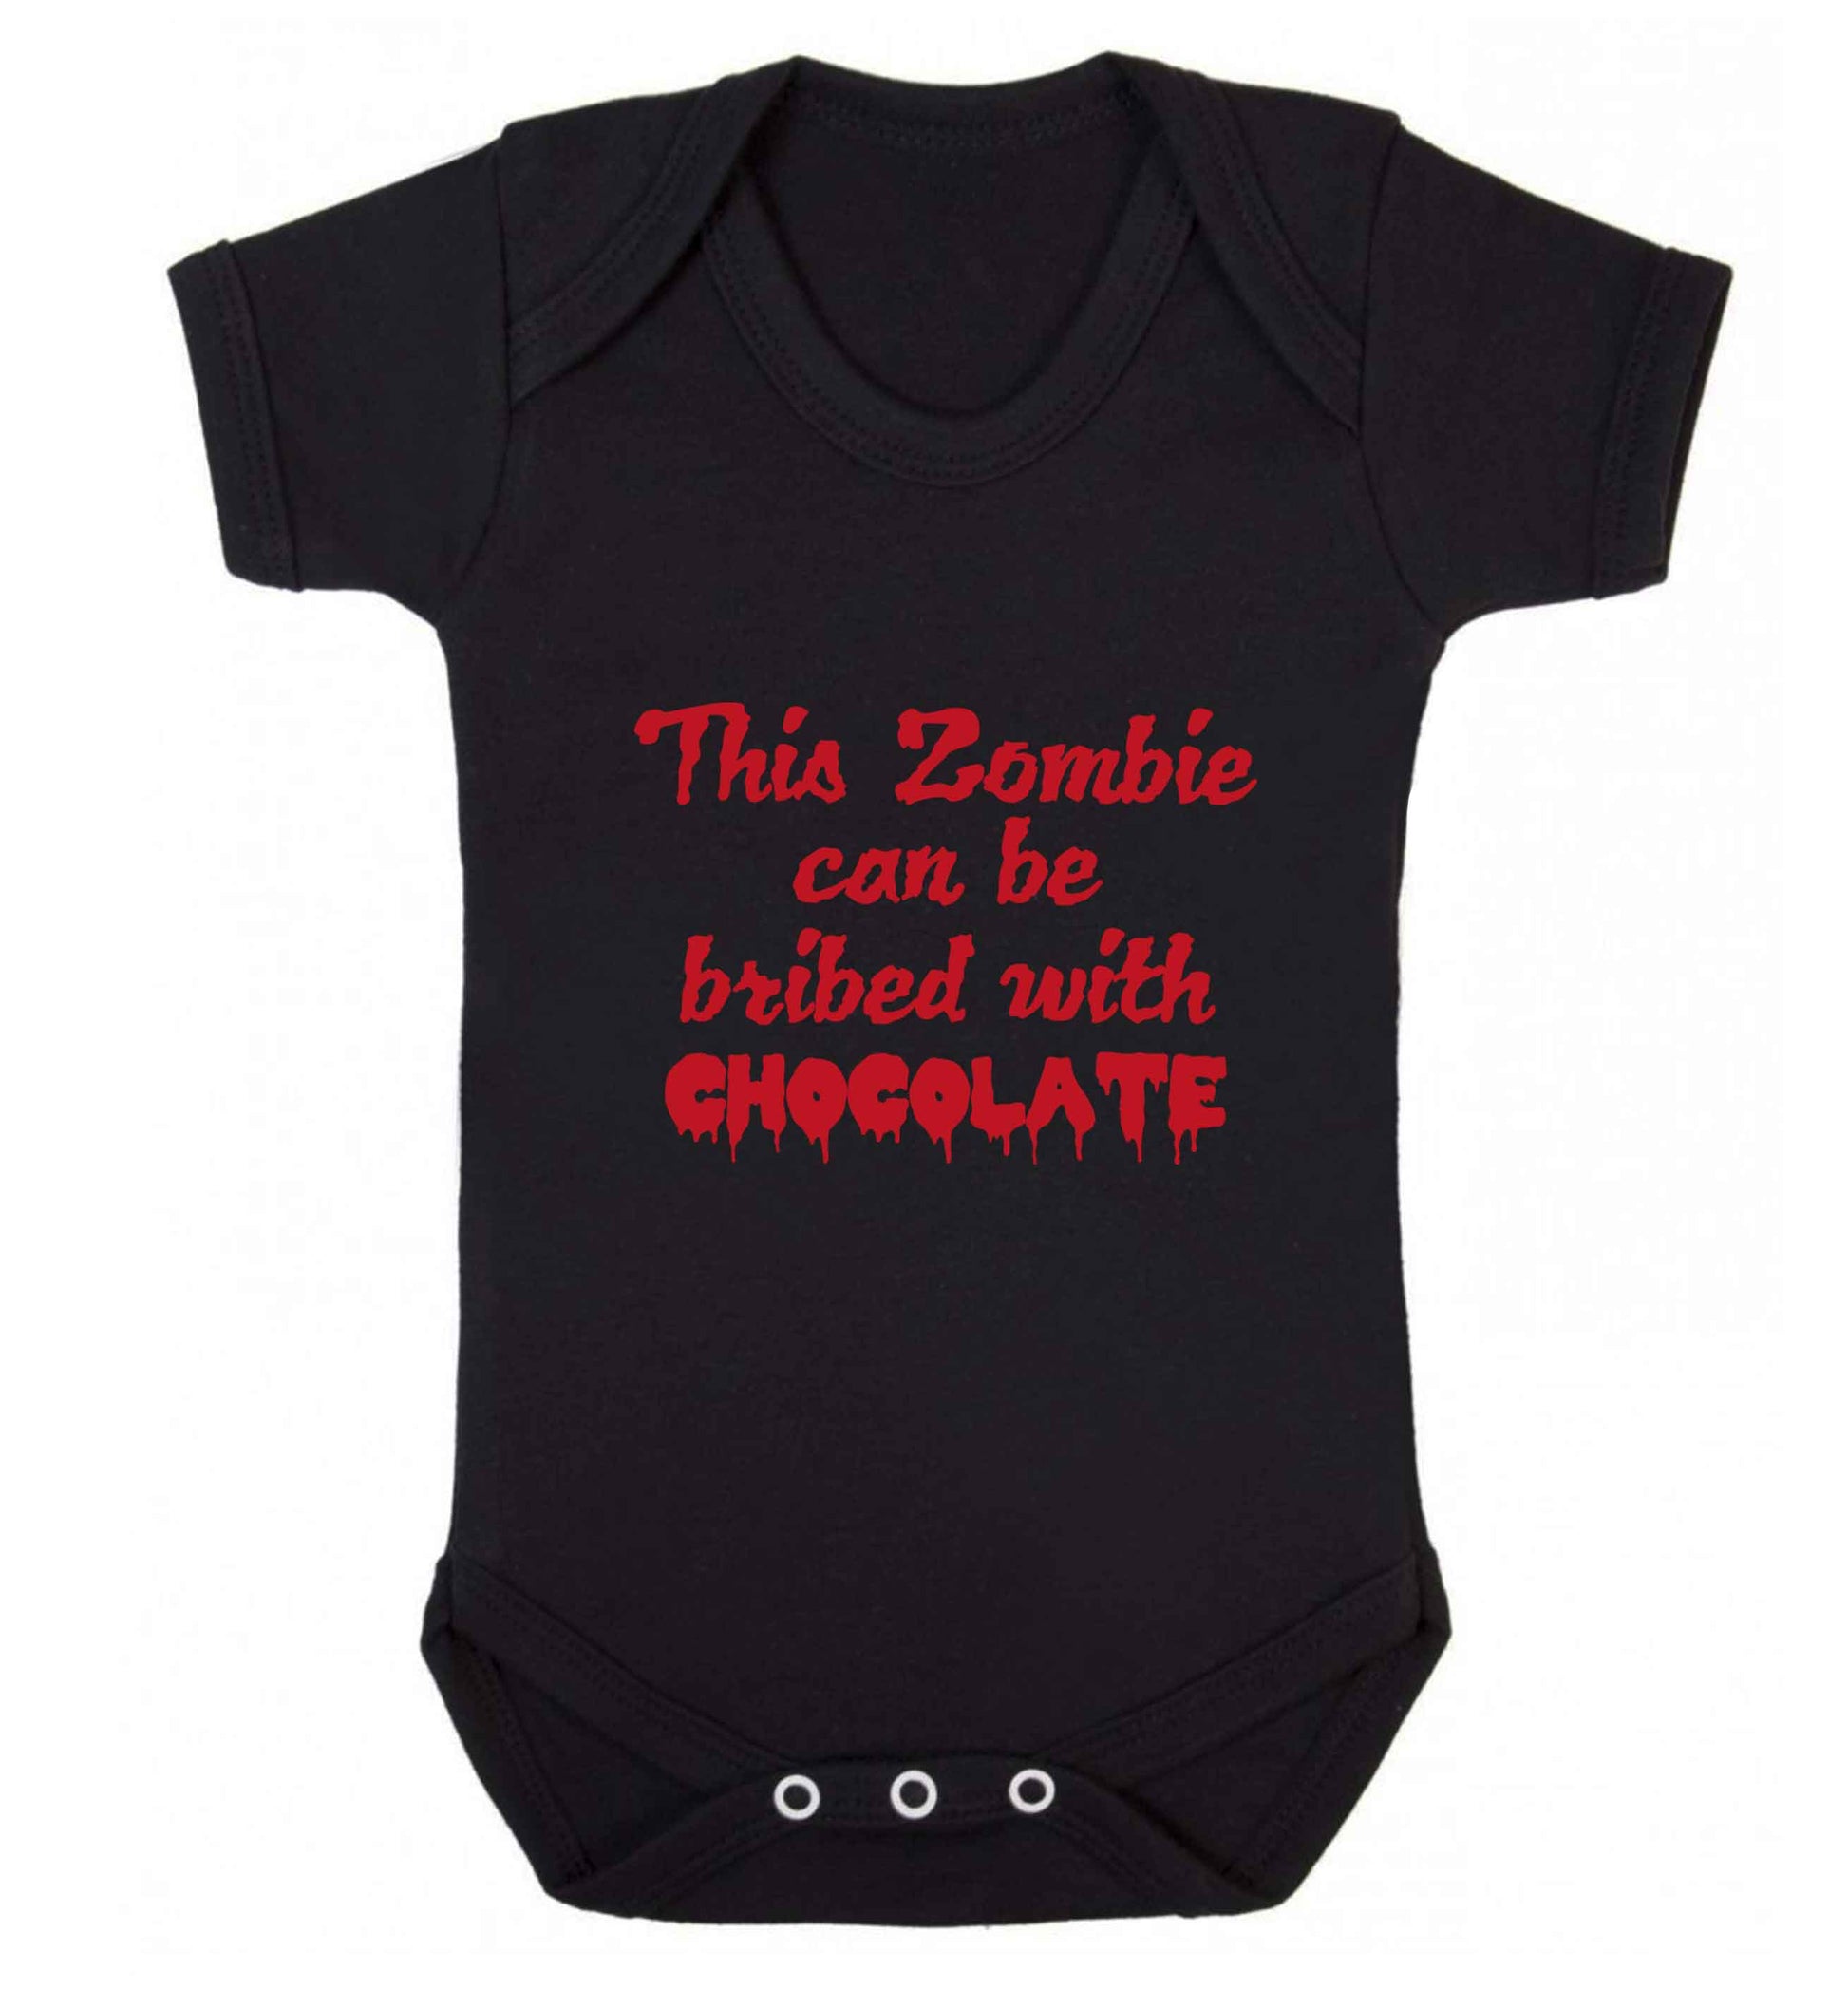 This zombie can be bribed with chocolate baby vest black 18-24 months